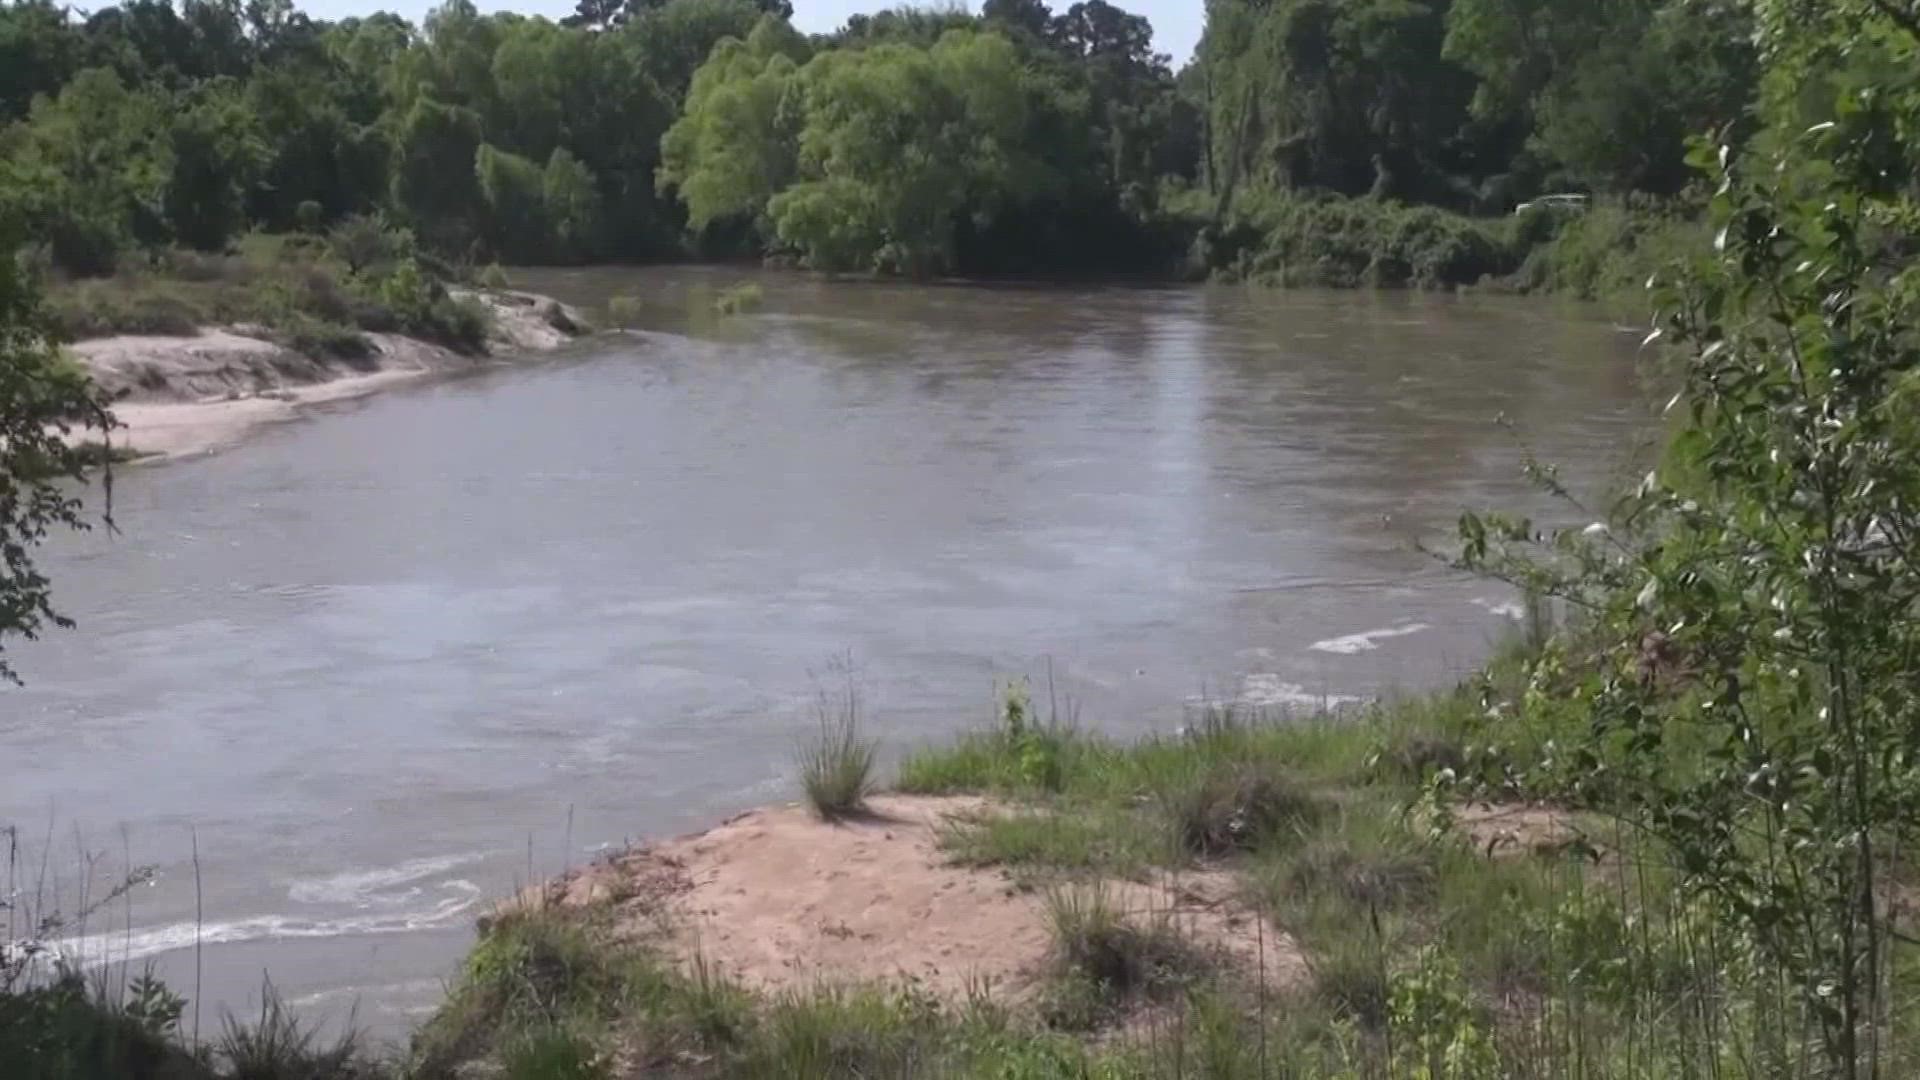 Officials said the river was flowing at about 15 mph on Sunday and advised people to stay out of the water when the conditions are like that.